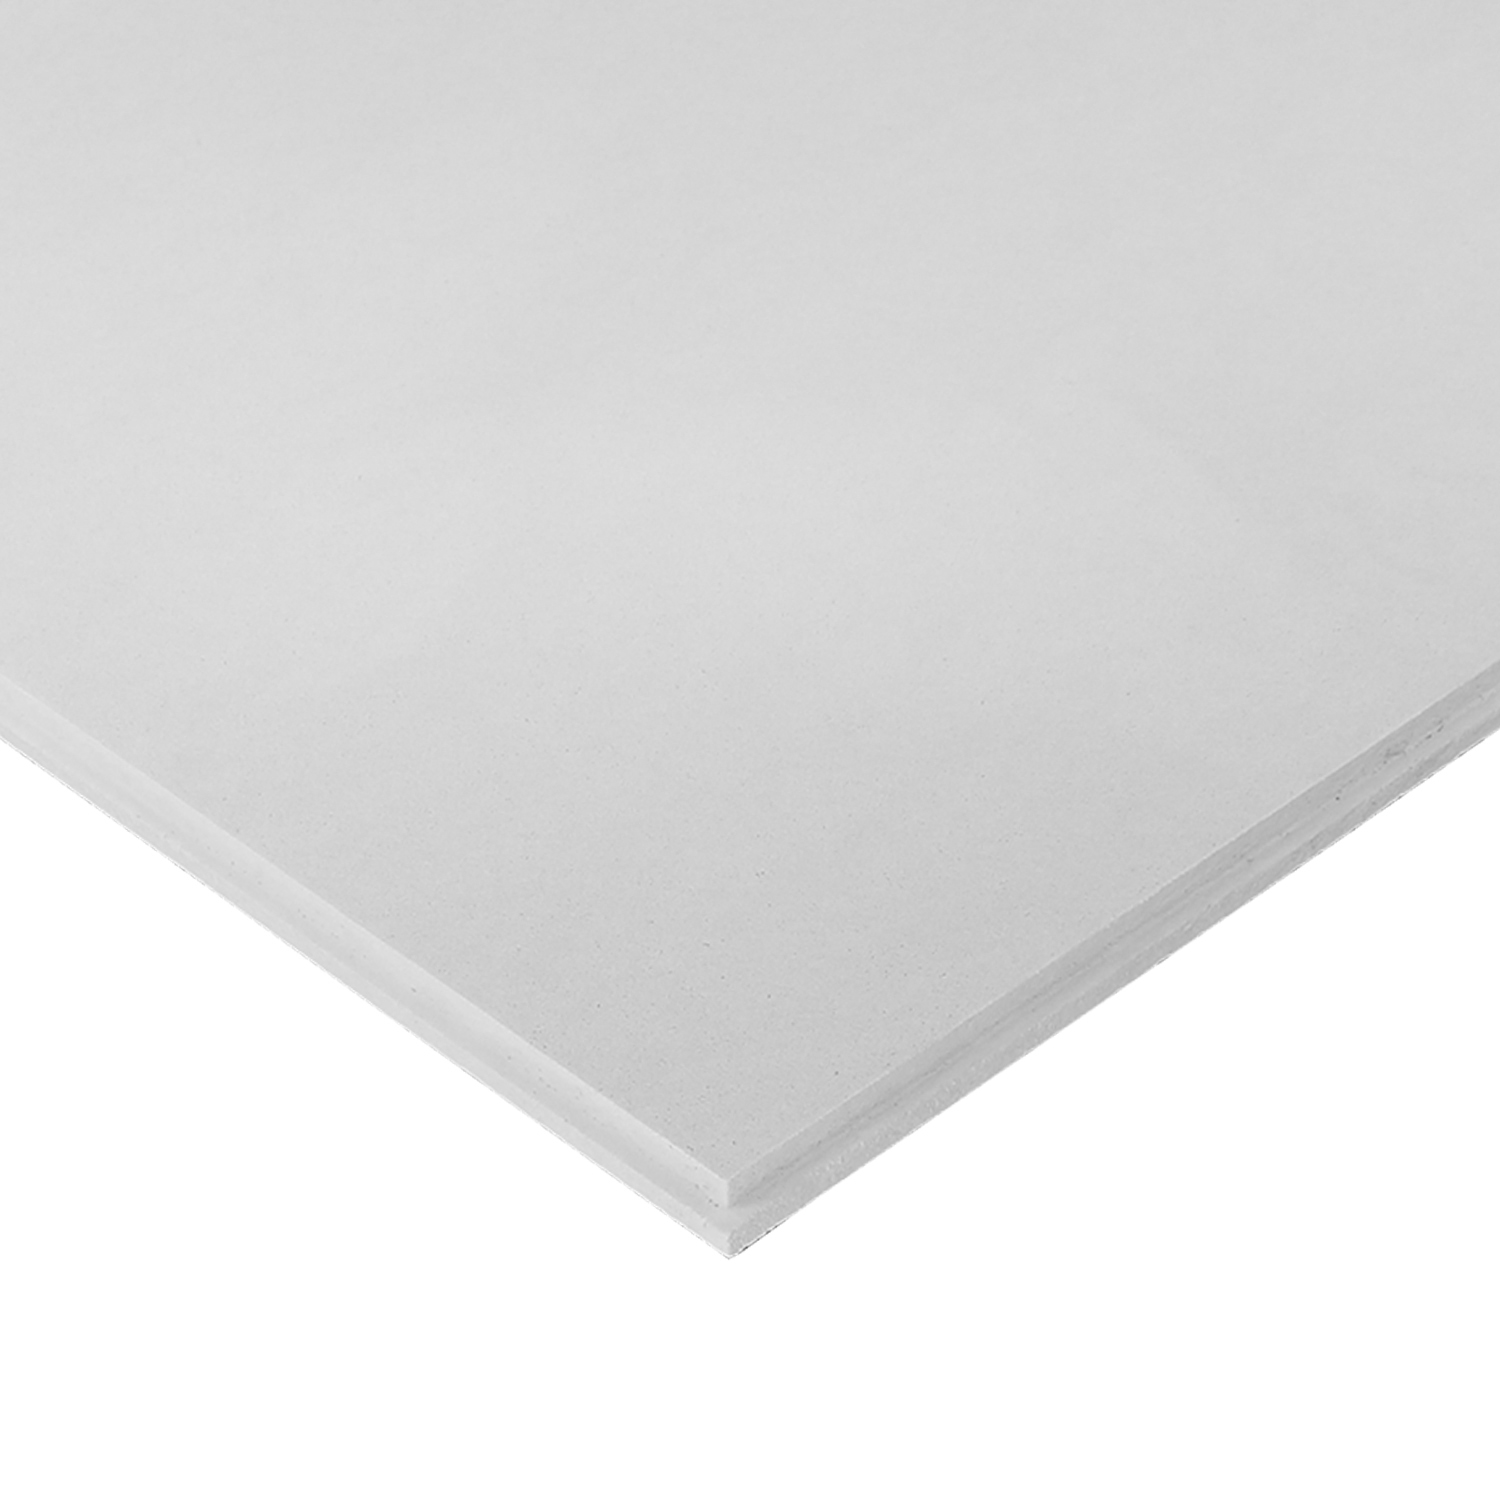 ROCKFON ARTIC Microlook Ceiling Tiles 600mm X 600mm FOR A 15MM GRID SYSTEM (Box Qty: 16)